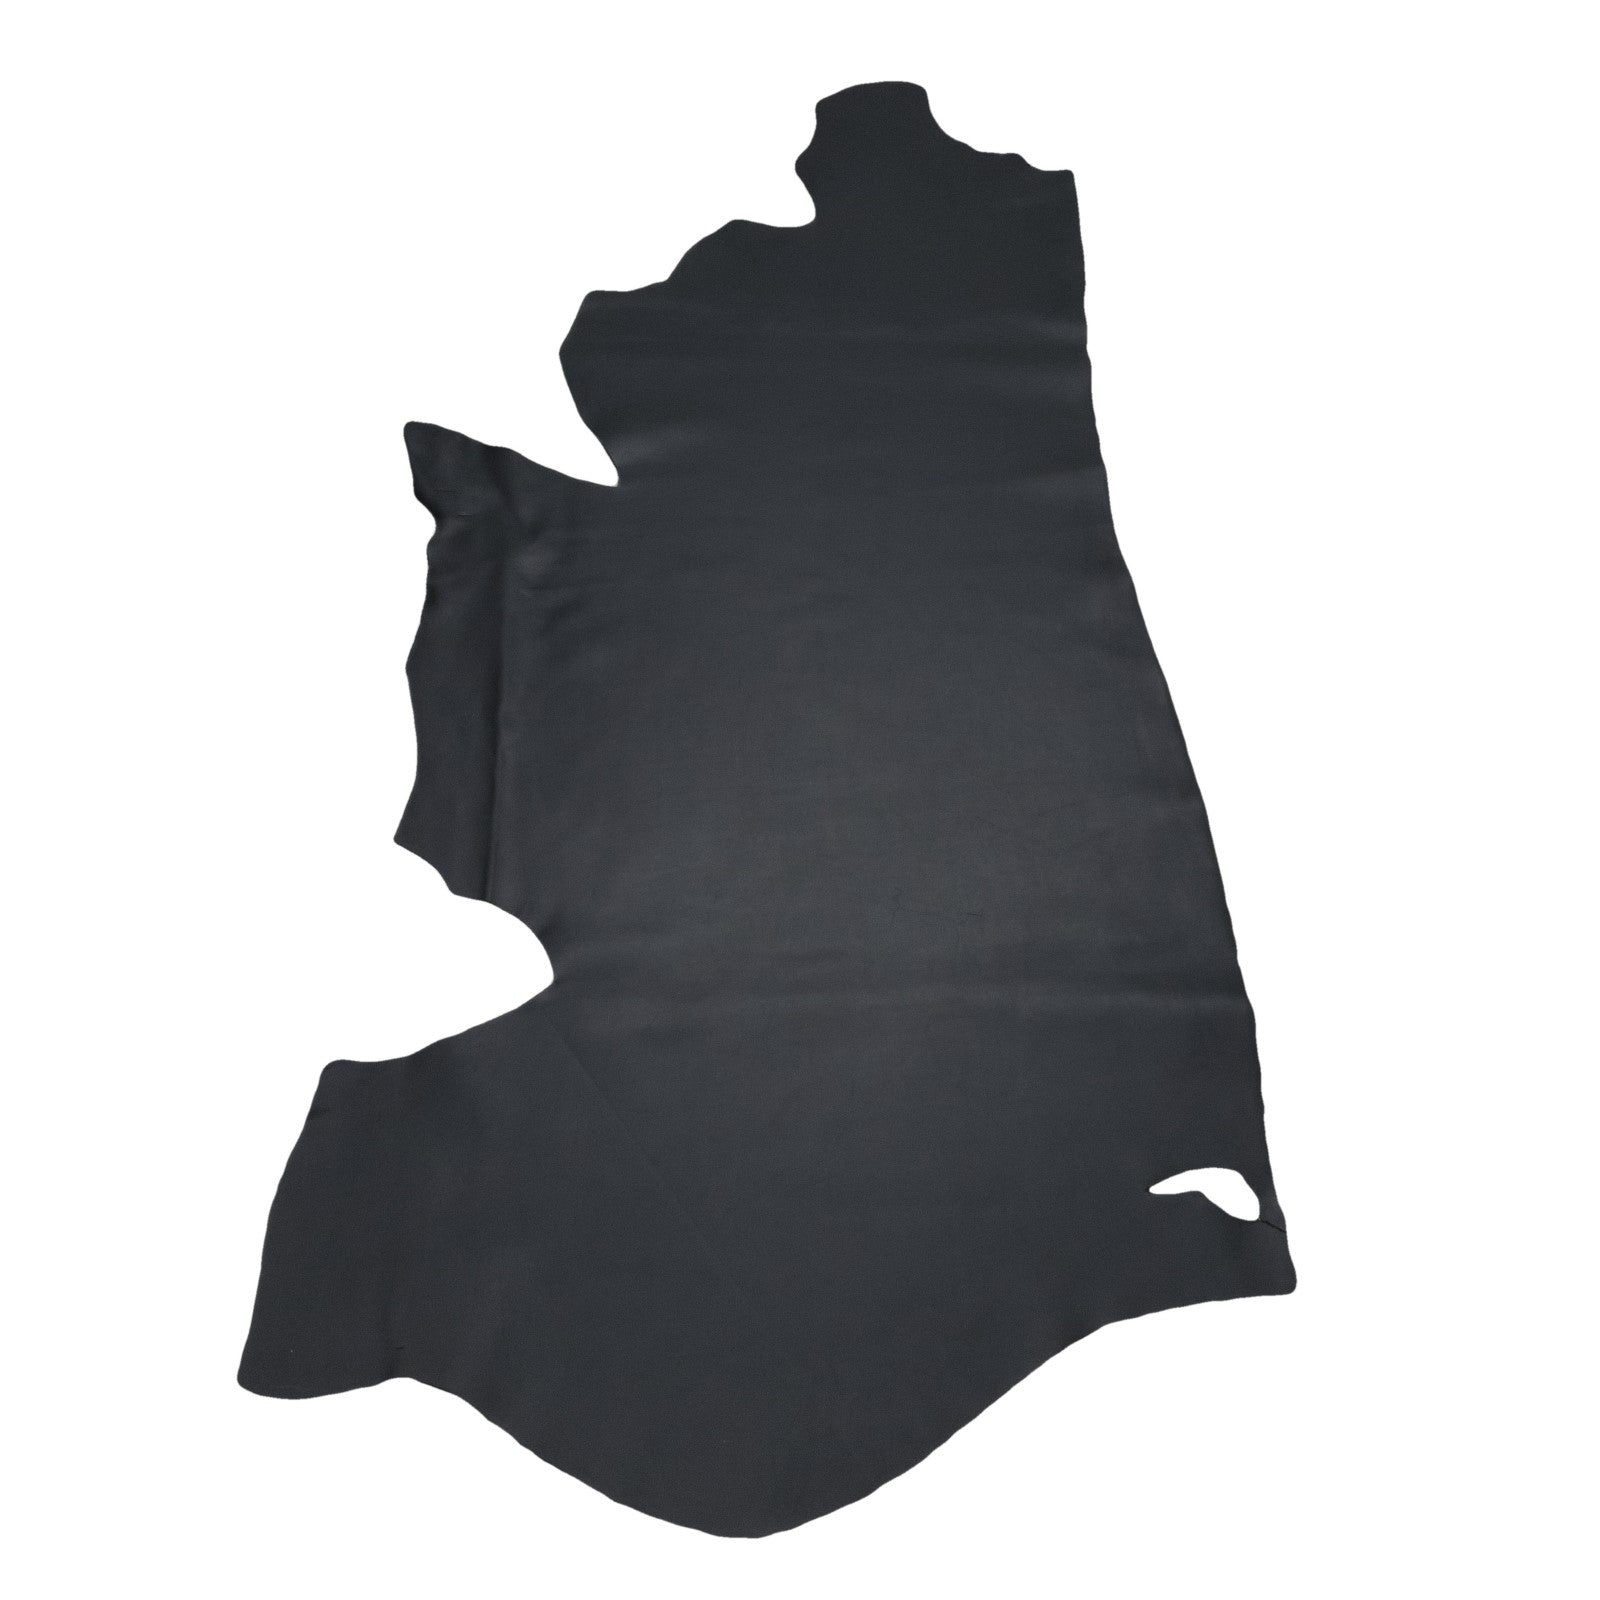 Classic Black, 5-6 oz,  Sq Ft Average, Oil Tan Sides,  | The Leather Guy